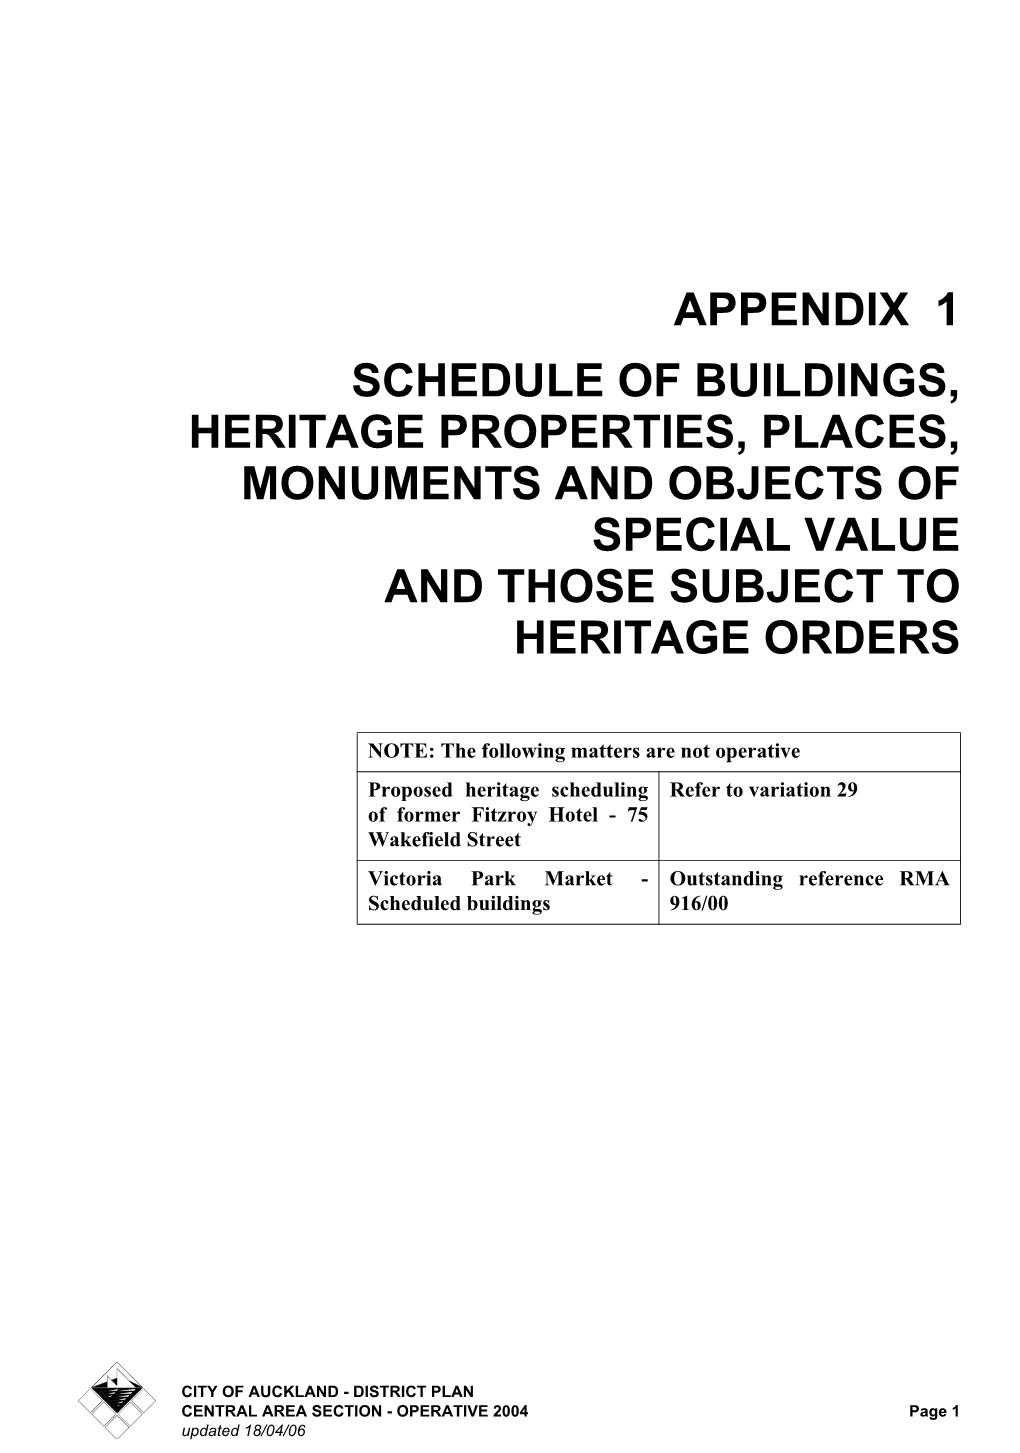 Appendix 1 Schedule of Buildings, Heritage Properties, Places, Monuments and Objects of Special Value and Those Subject to Heritage Orders